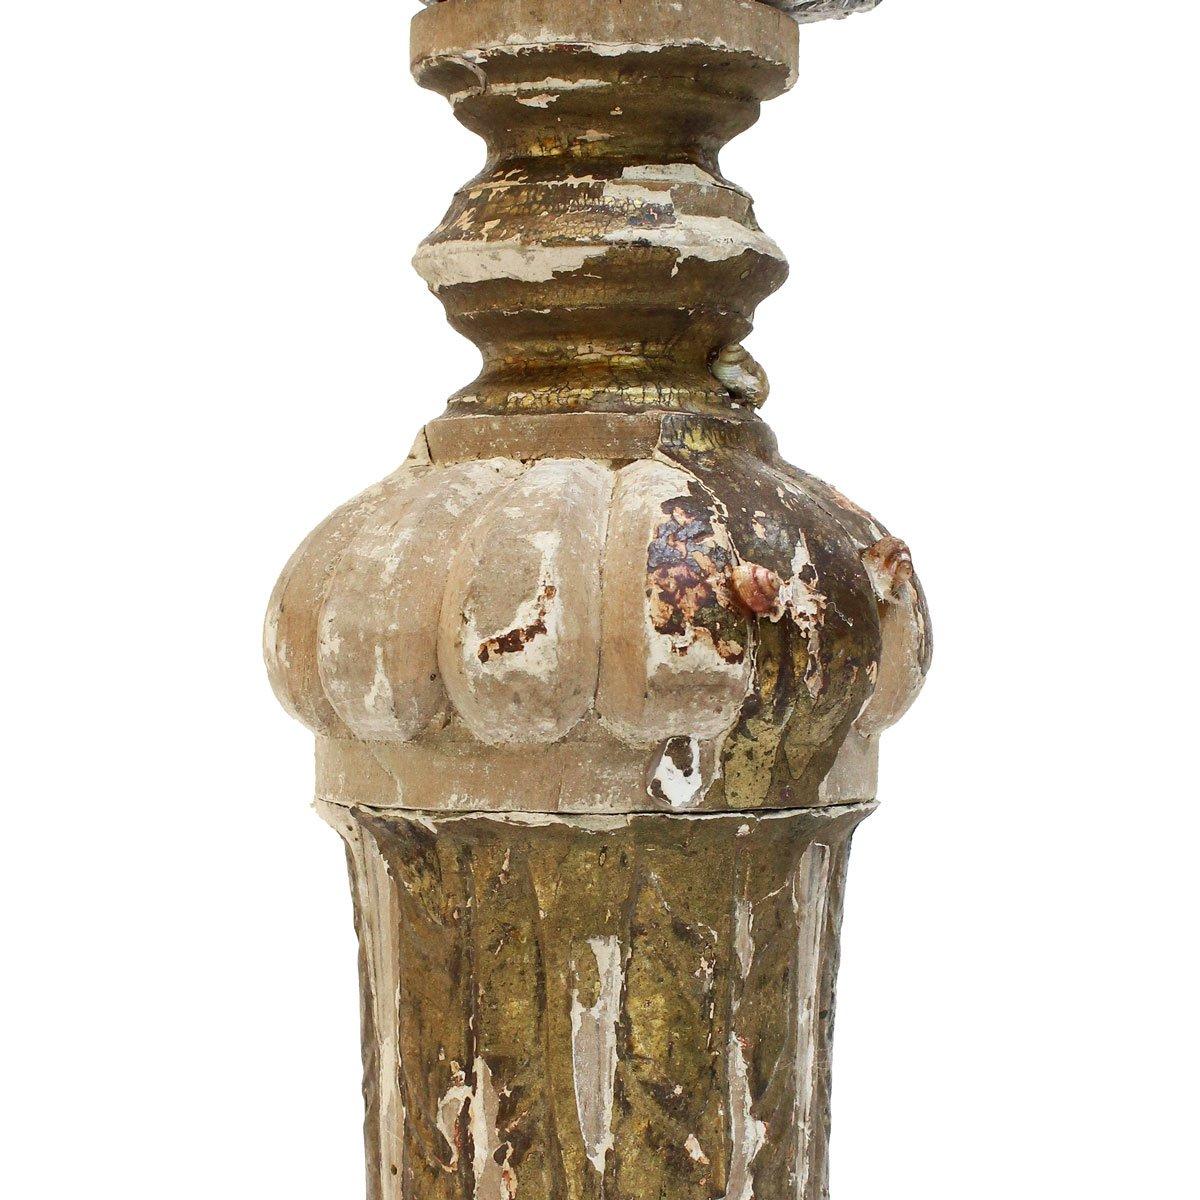 Baroque 18th Century Decorated Italian Candlestick Artifact with a Fossil Clam Shell